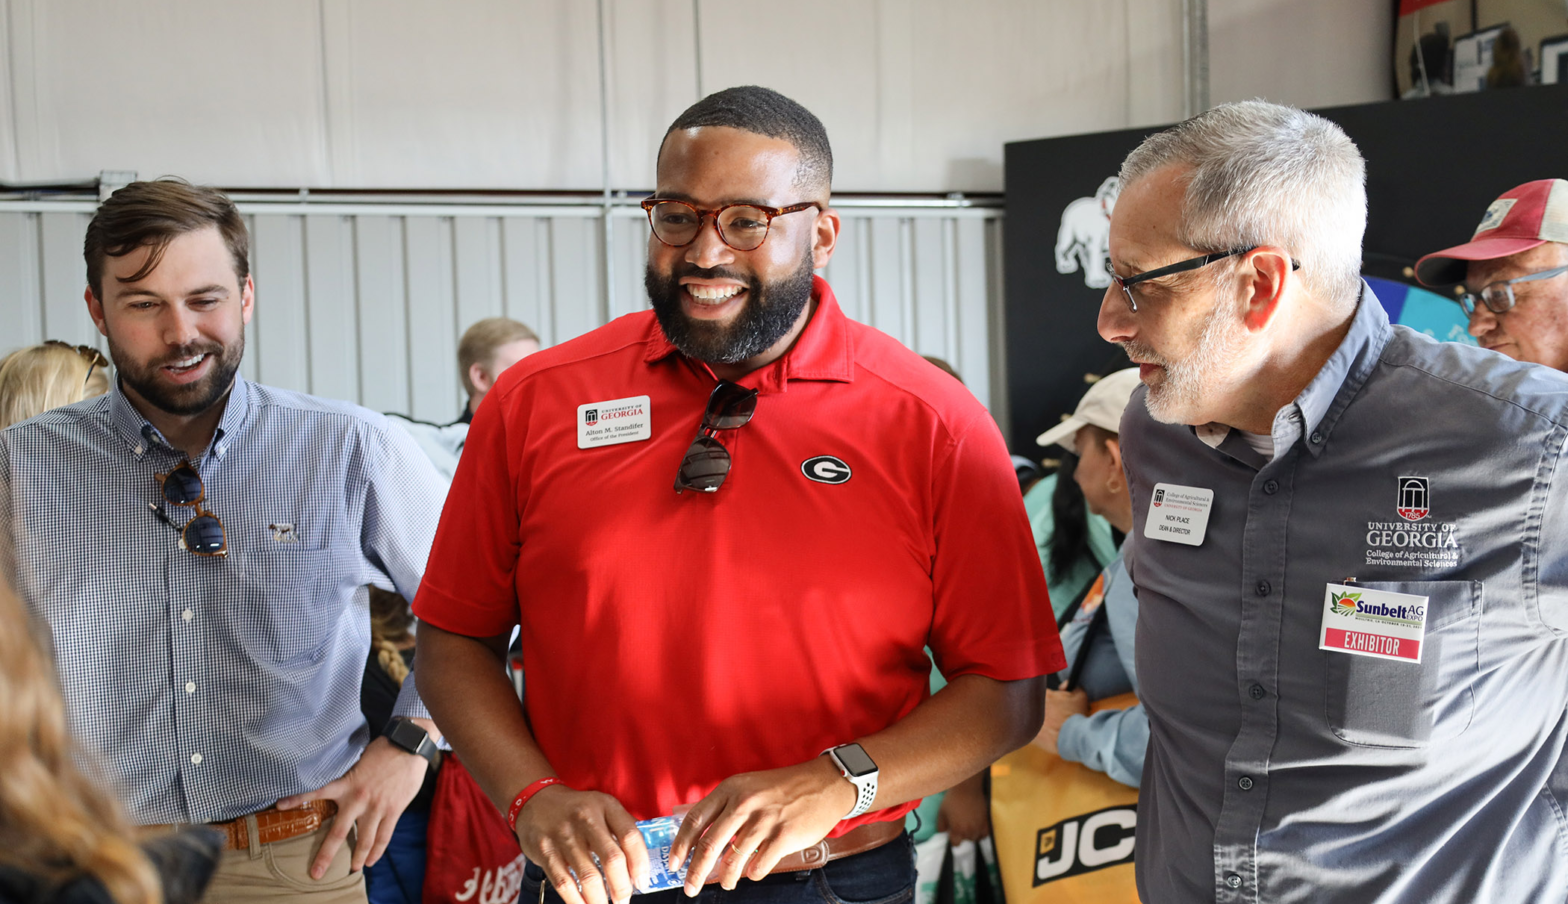 From left, Blake Raulerson, Alton Standifer and Nick Place talk with CAES Ambassadors at the Sunbelt Ag Expo in Moultrie, Georgia.